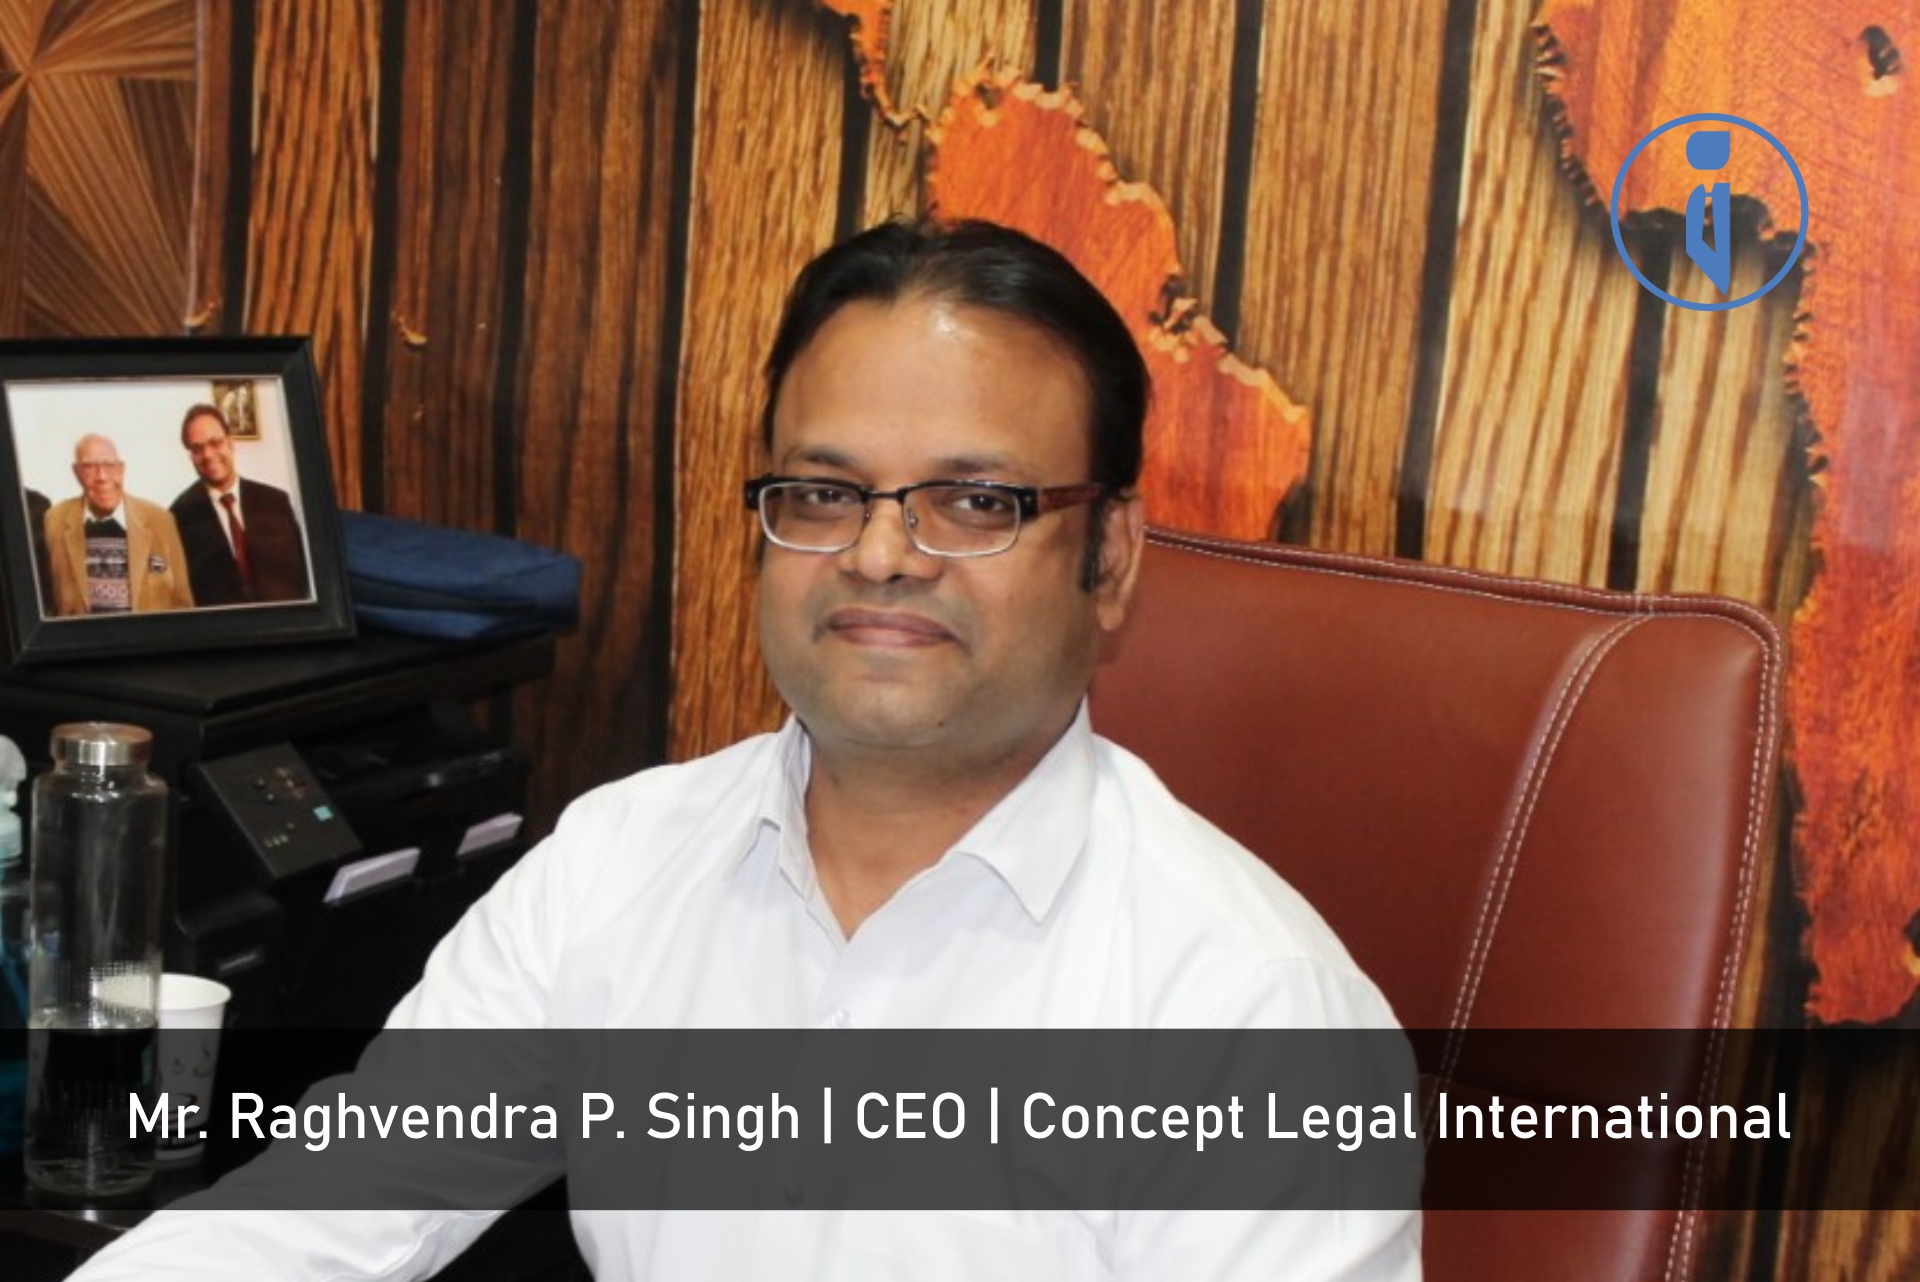 Concept Legal International- A Revolutionary in Legal Works